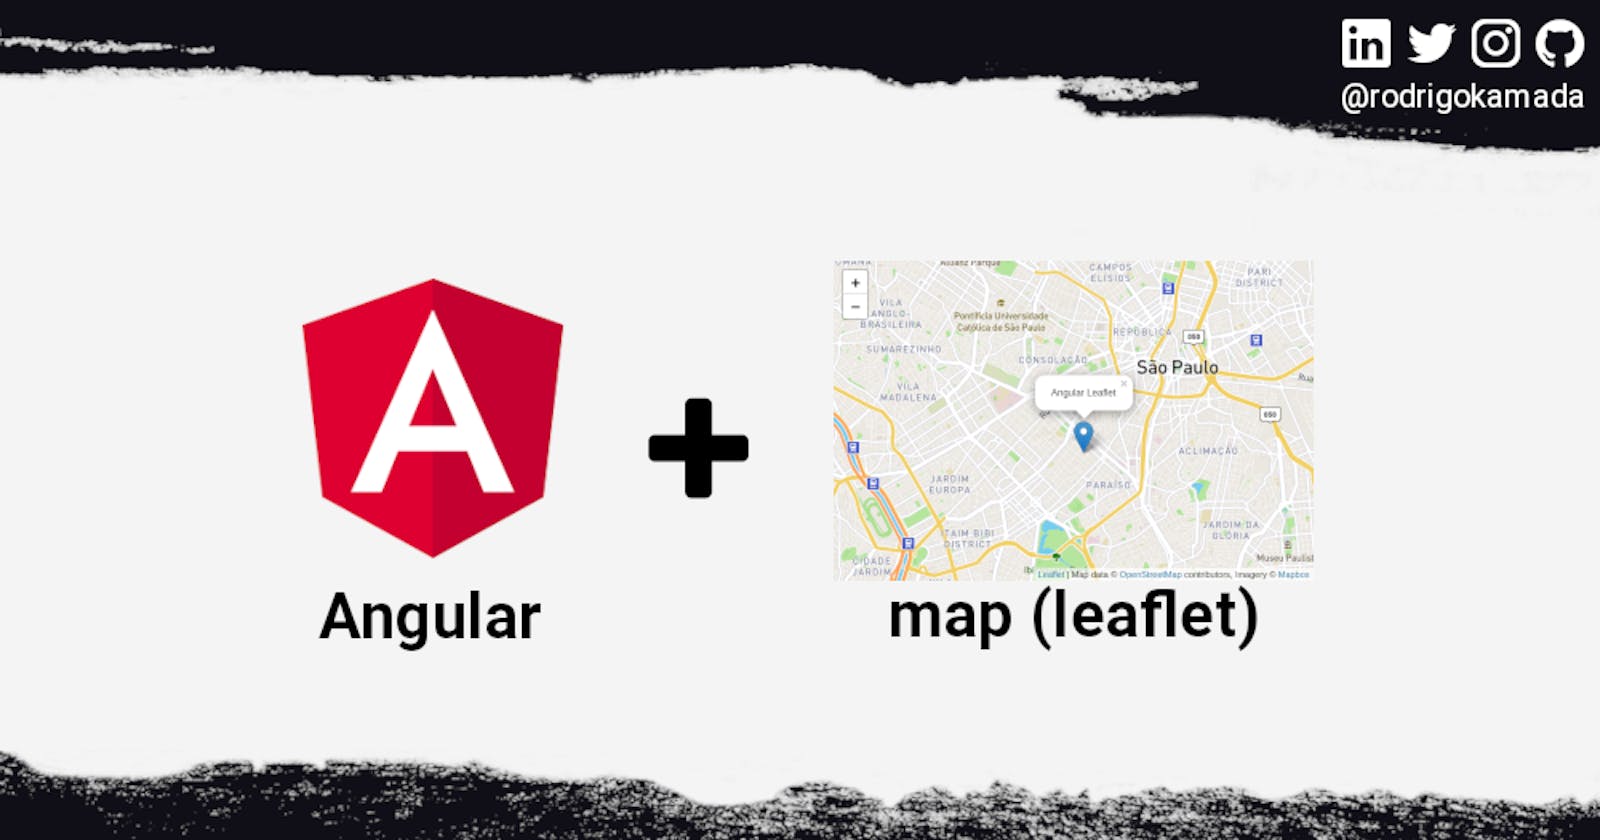 Adding the map Leaflet component to an Angular application